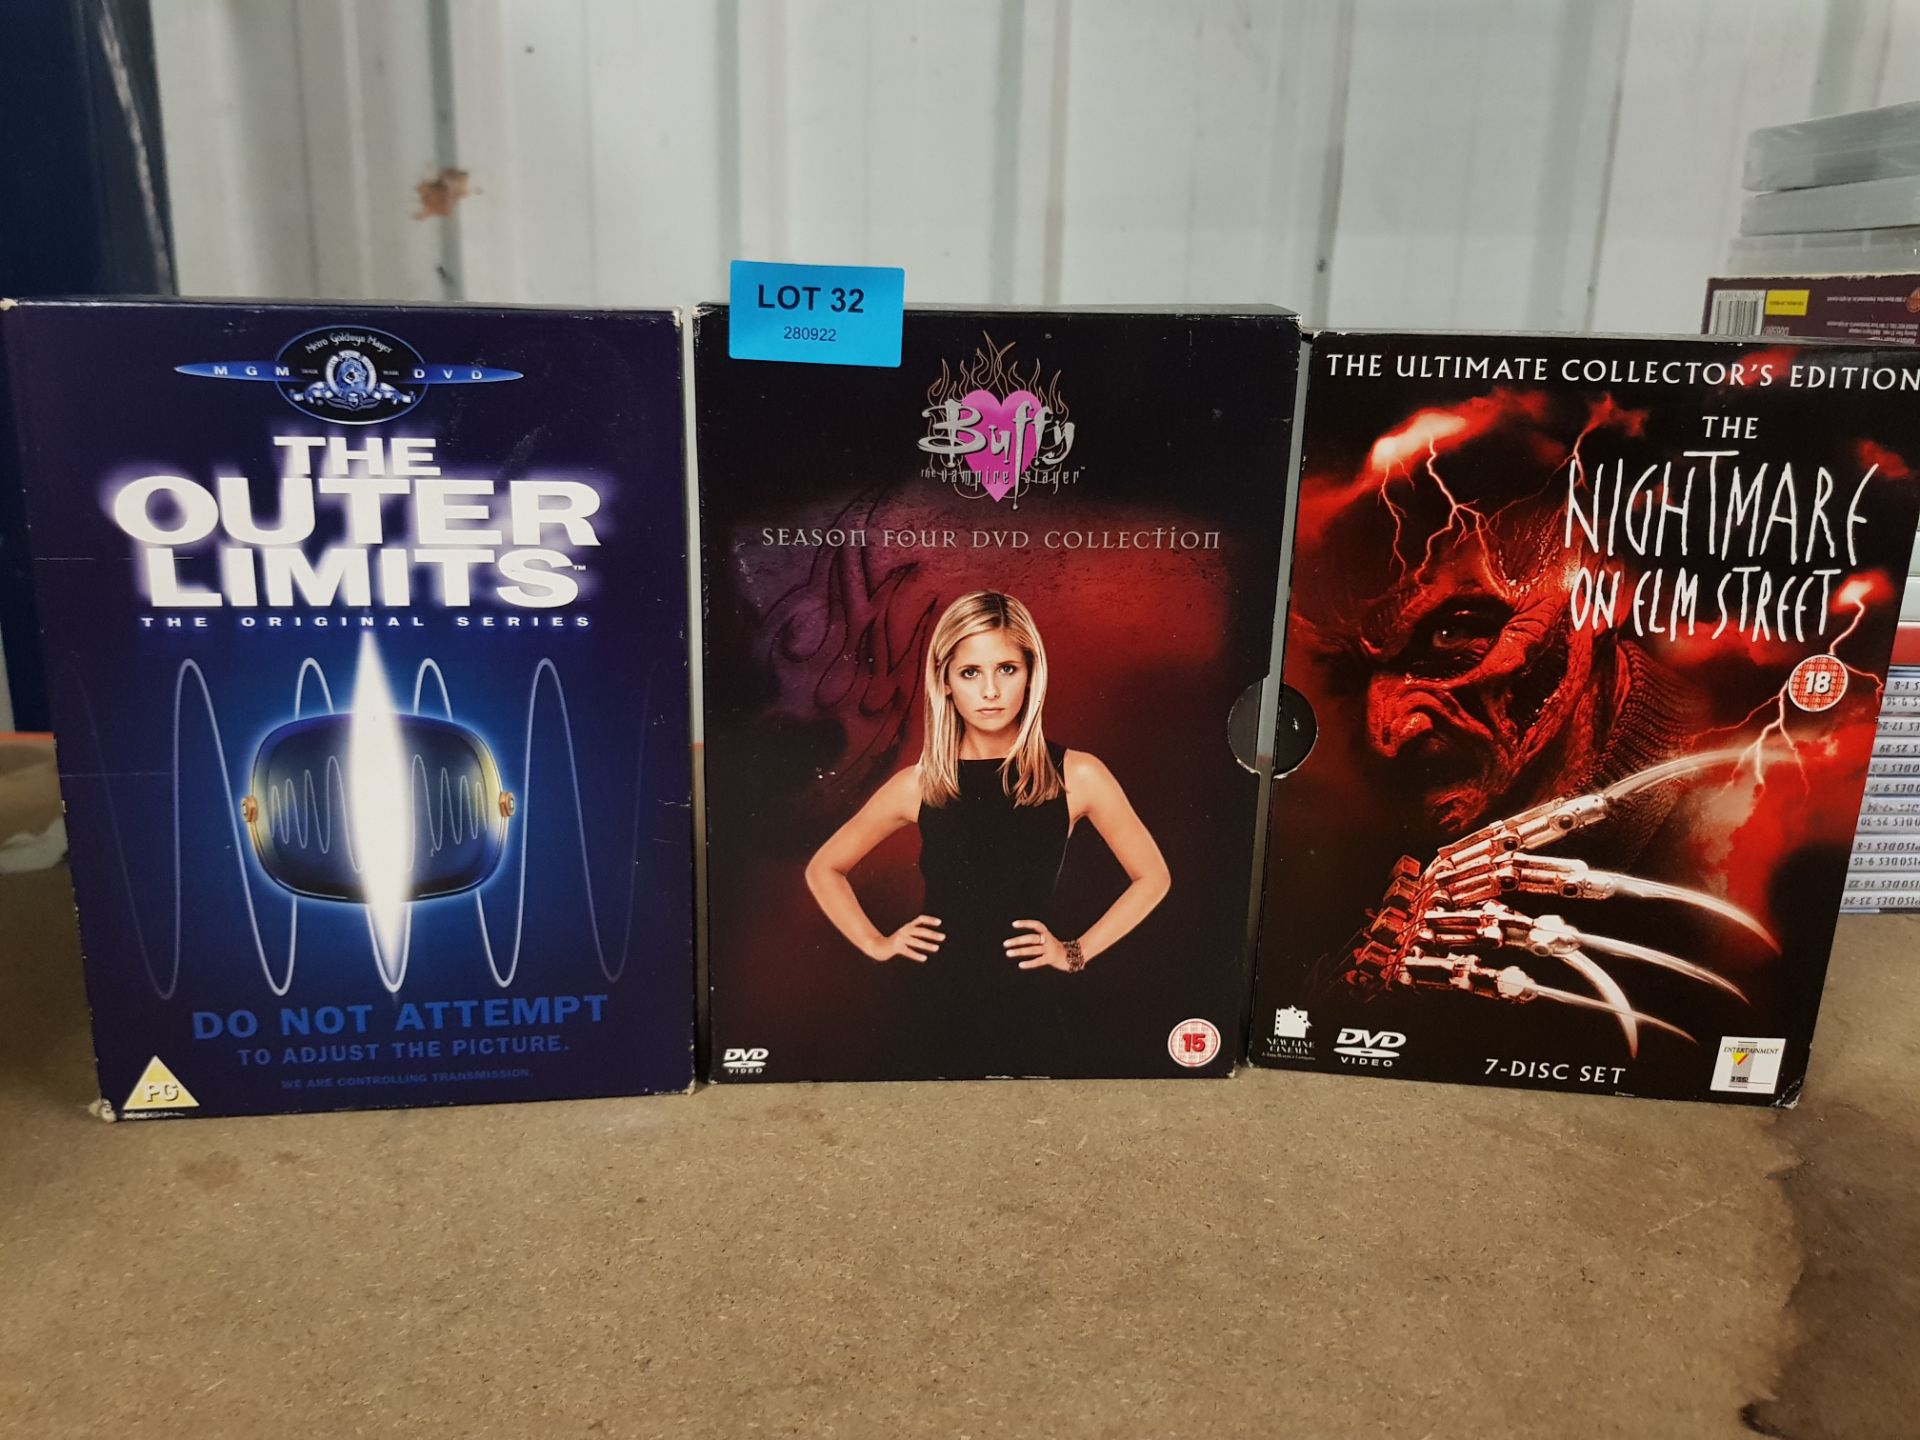 Title: (32/11D) Lot RRP £90. 3x DVD Boxset Items. 1x The Nightmare On Elm Street 7 Disc Set - Image 4 of 7